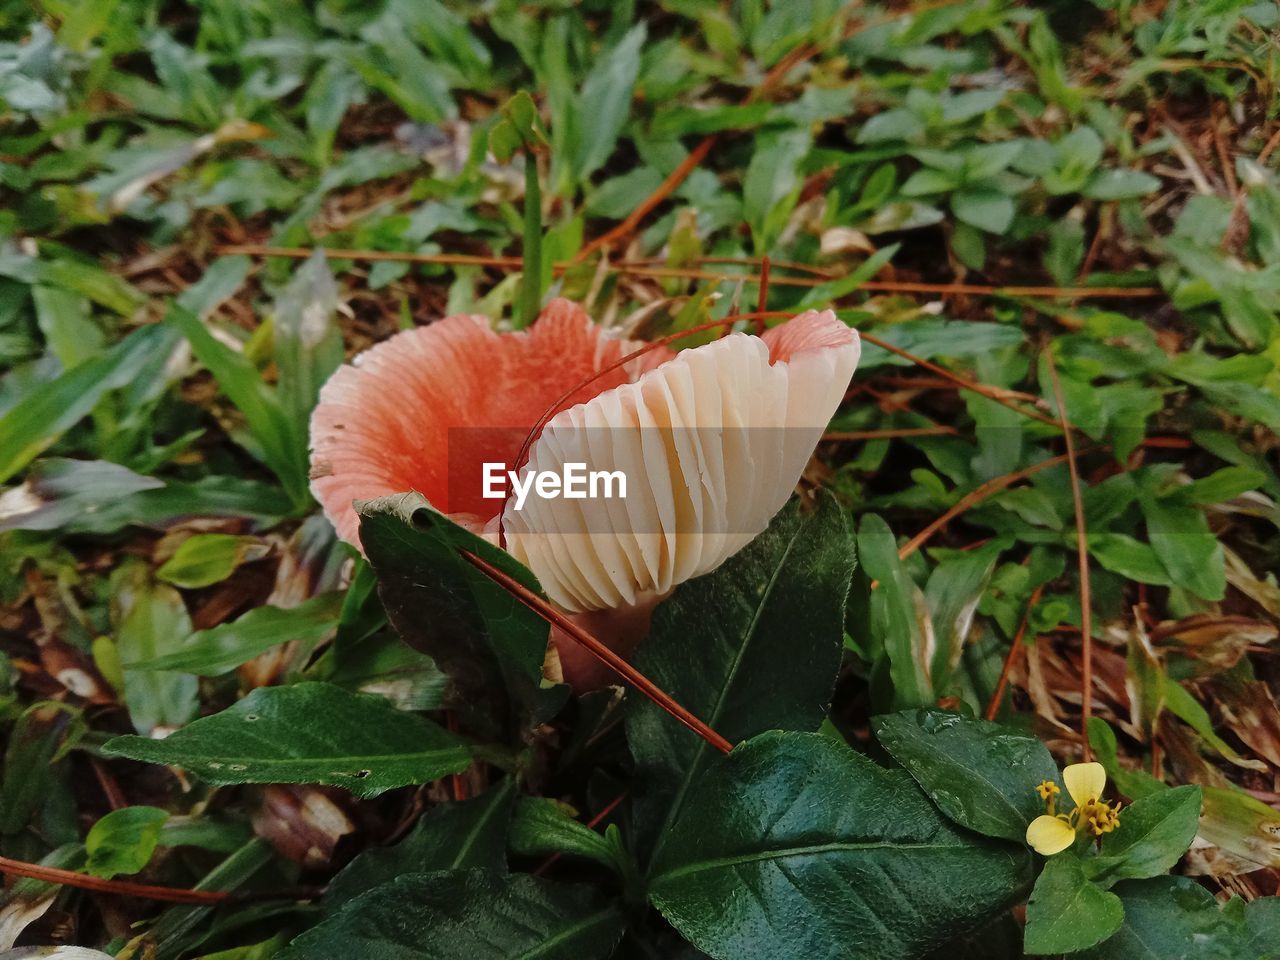 plant, flower, growth, leaf, plant part, beauty in nature, nature, freshness, flowering plant, fragility, close-up, green, no people, petal, land, day, flower head, inflorescence, outdoors, mushroom, high angle view, food, vegetable, focus on foreground, field, wildflower, botany, fungus